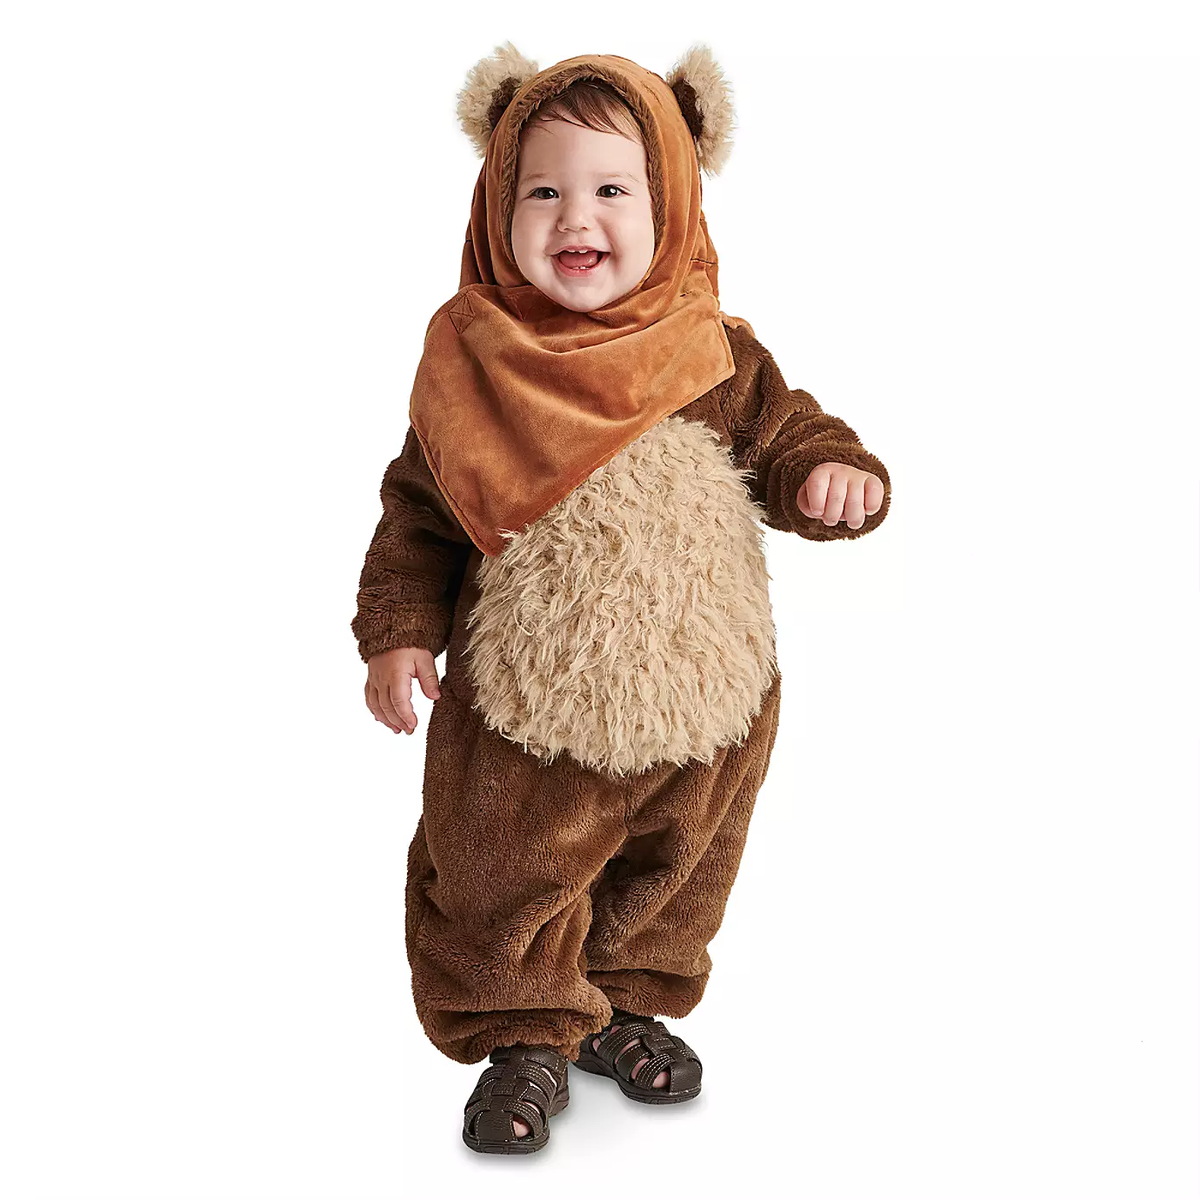 Ewok Costume for Baby from Star Wars